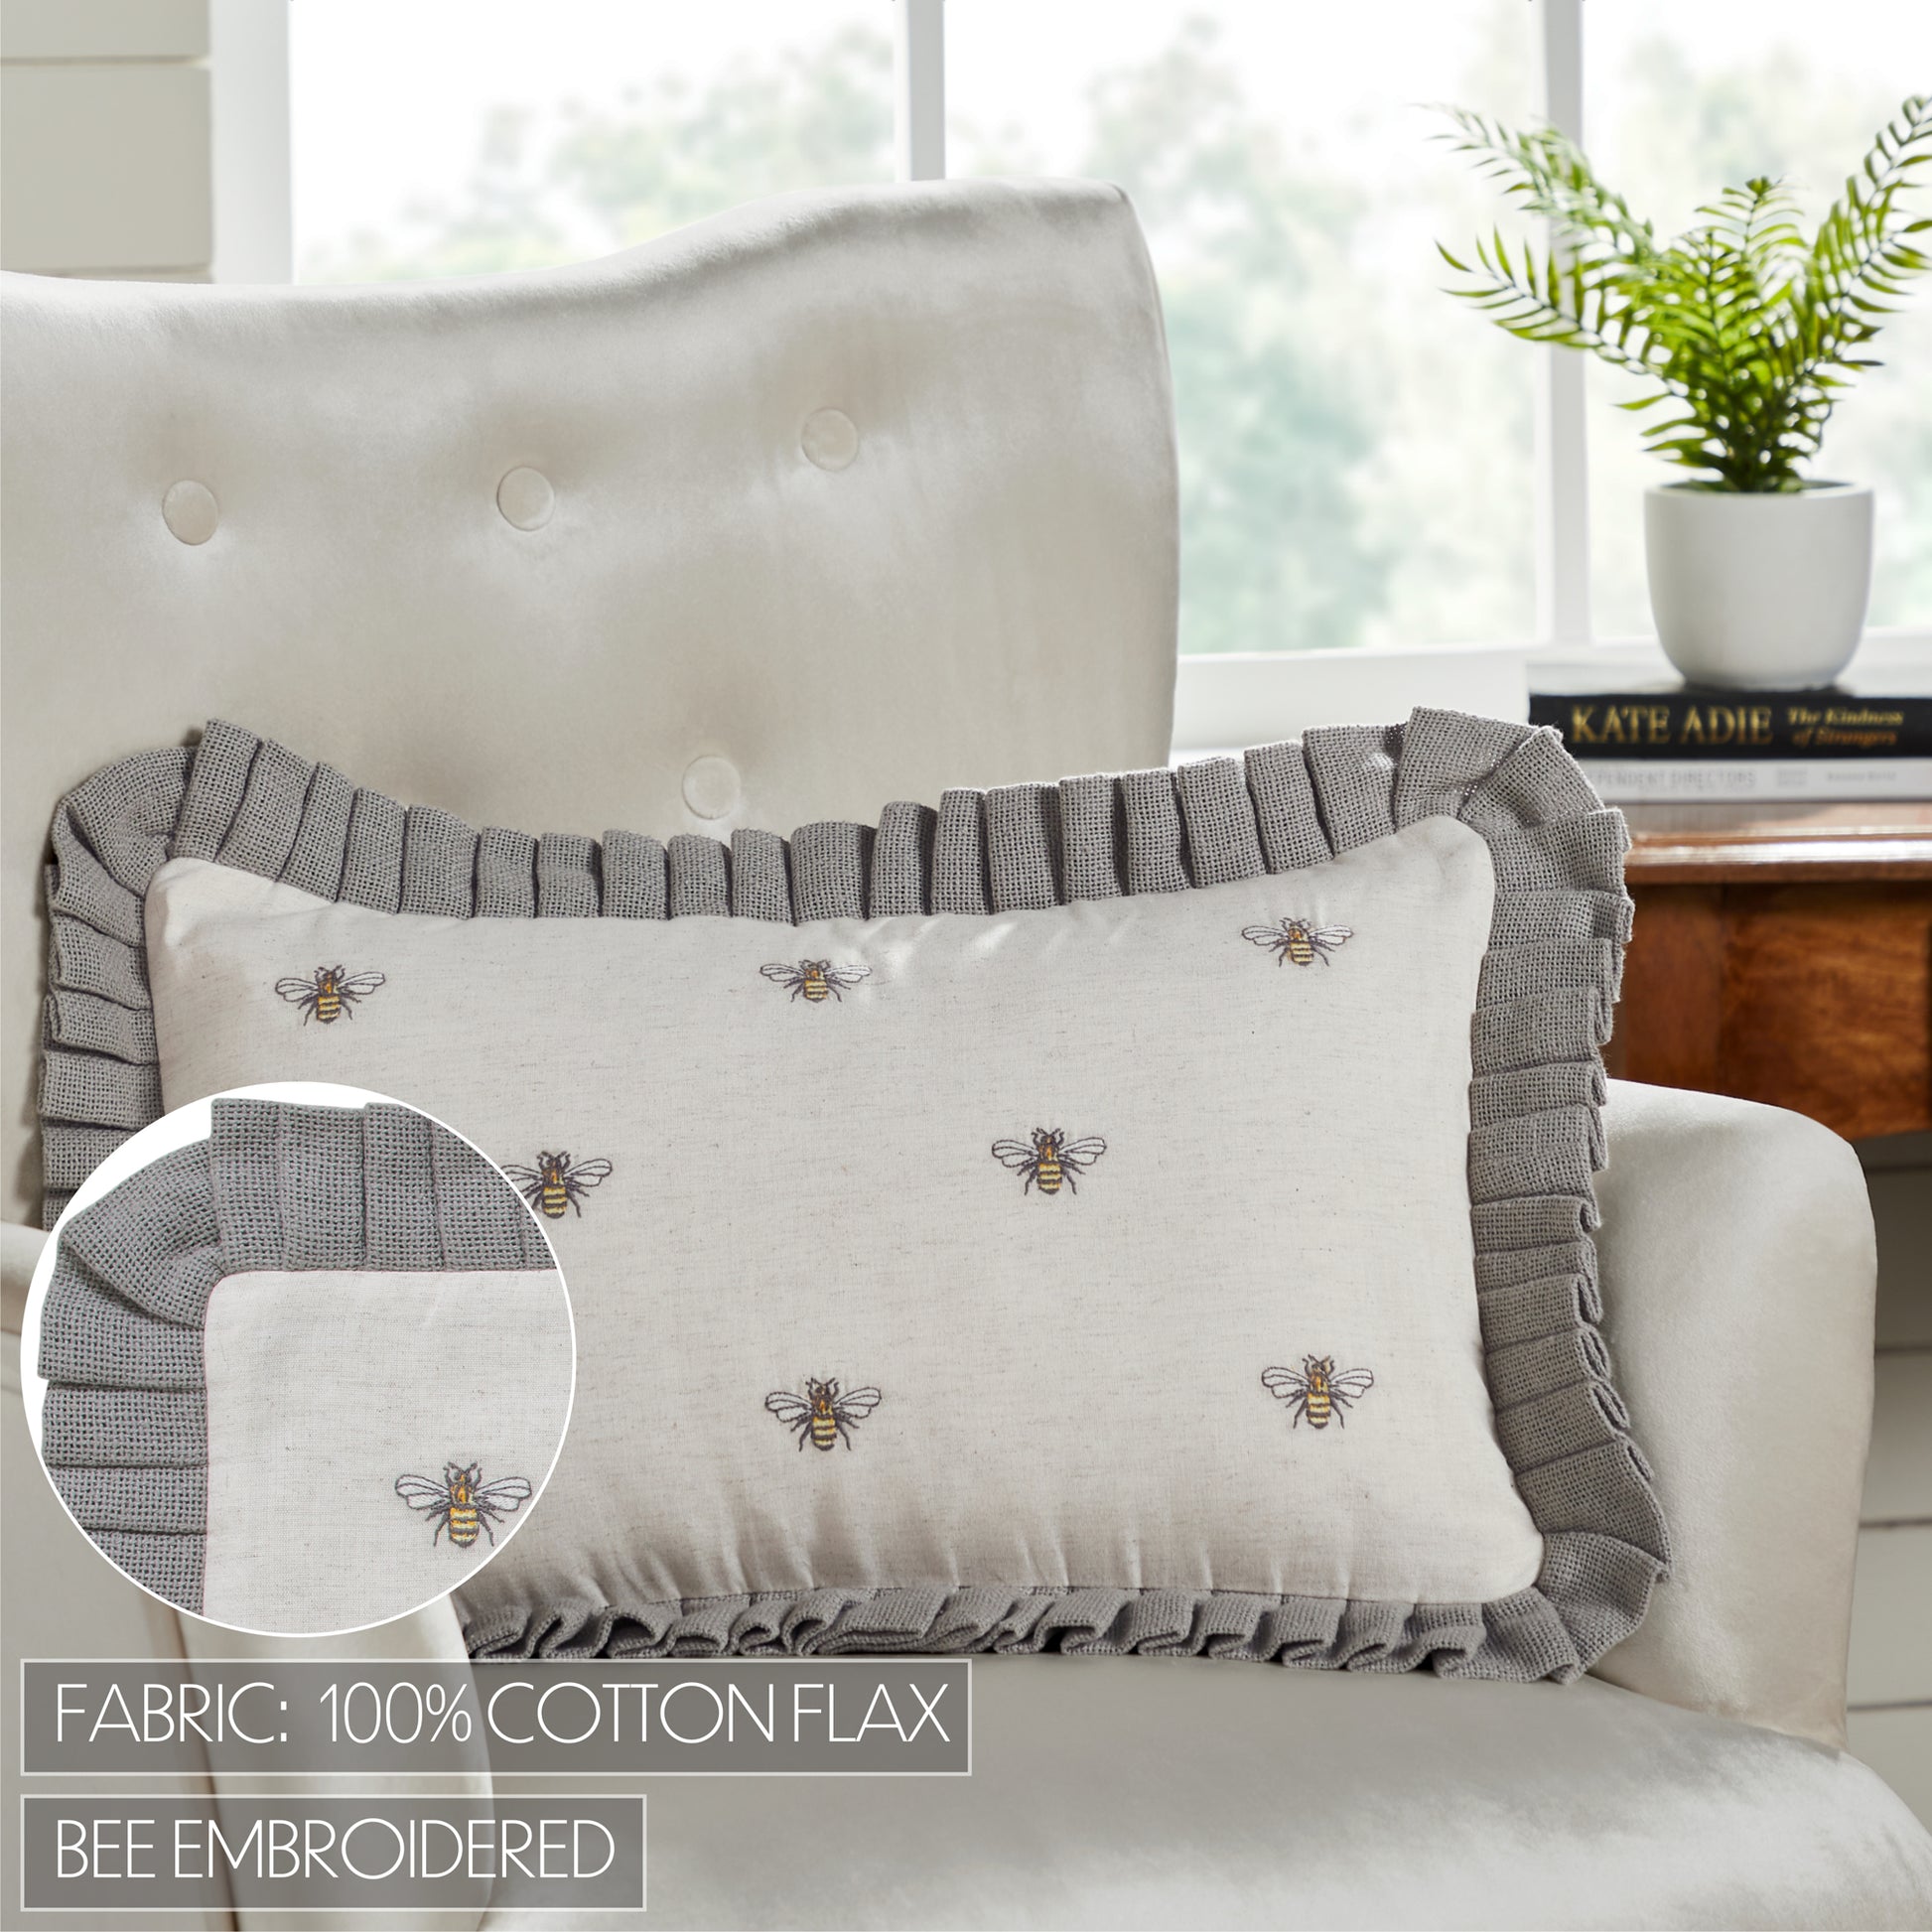 81260-Embroidered-Bee-Pillow-14x22-image-2